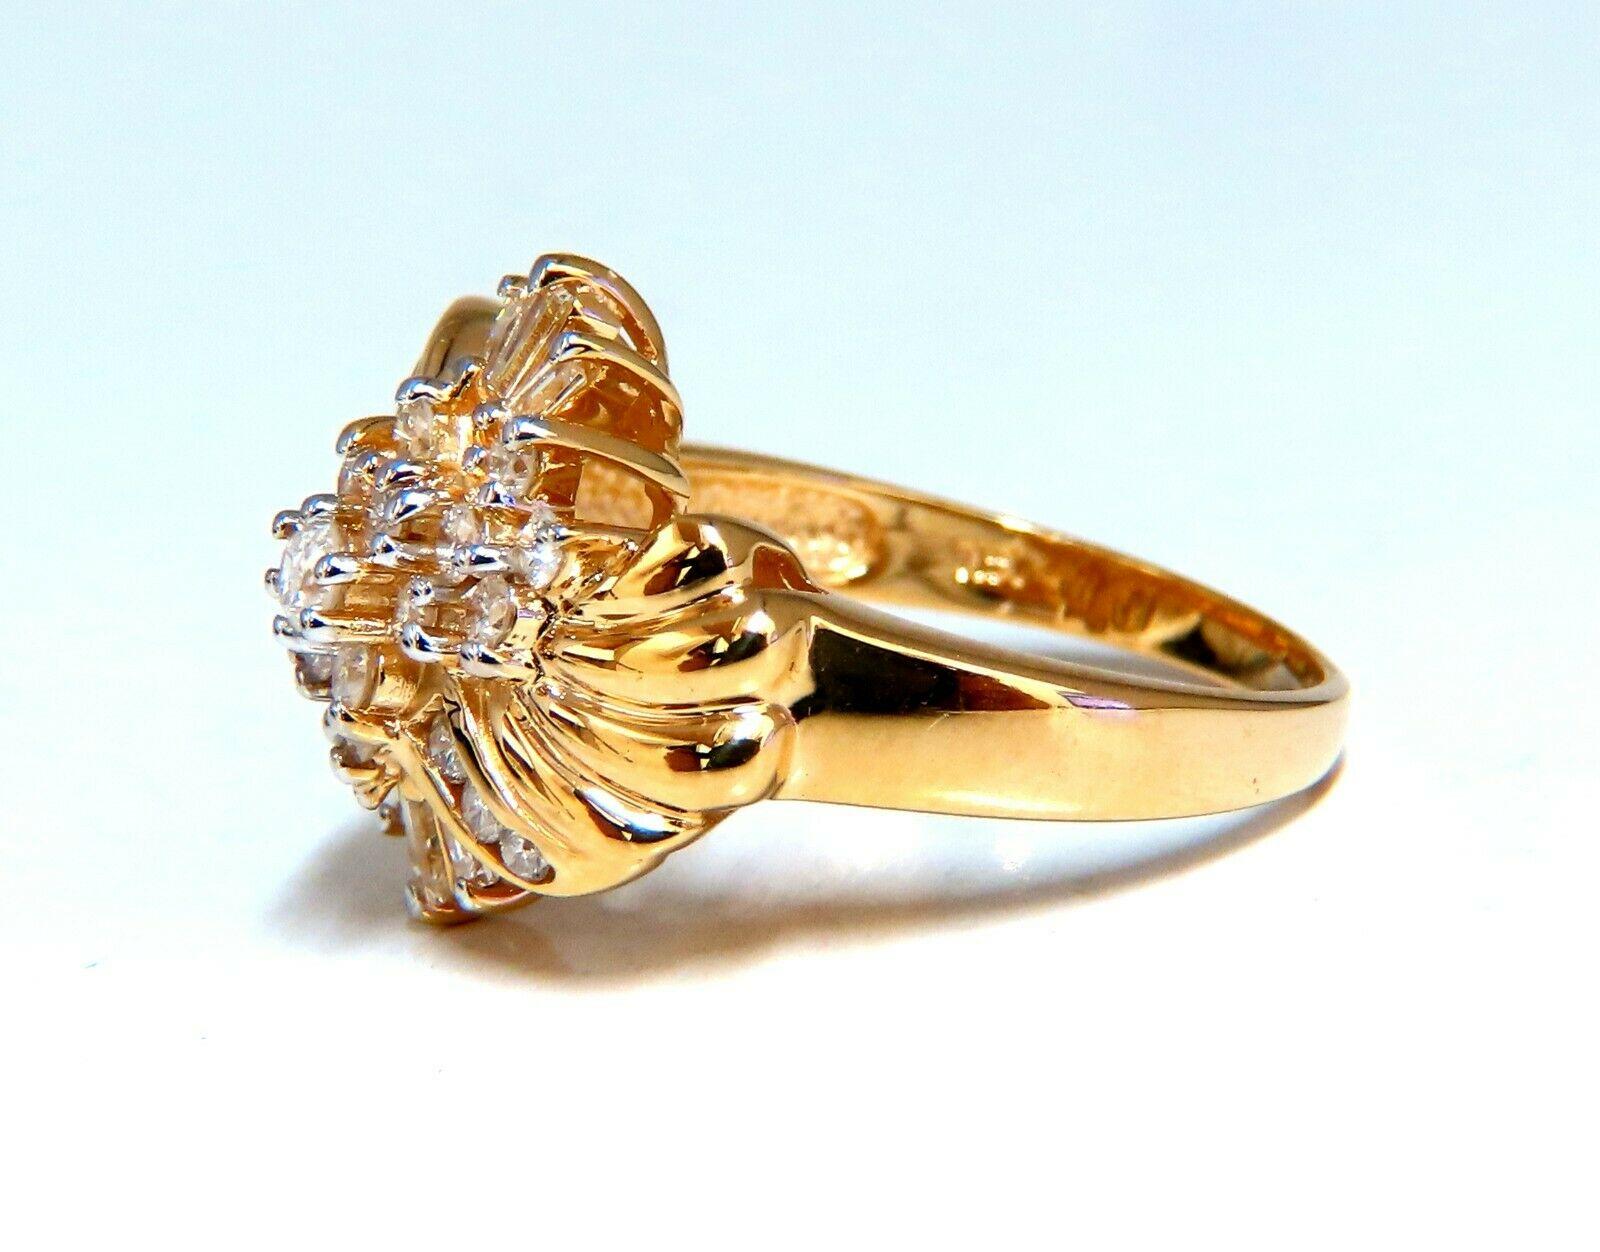 .70ct diamonds cluster ring. H-color vs-2 clarity. 14kt yellow gold. Item: 4.9gms $800

Marquise & Rounds Flaming cocktail.

.70cts Natural Round & Baguette diamonds,

Full cut Brilliants

H-color, Vs-2 Si-1  clarity.

14kt. yellow gold

4.9